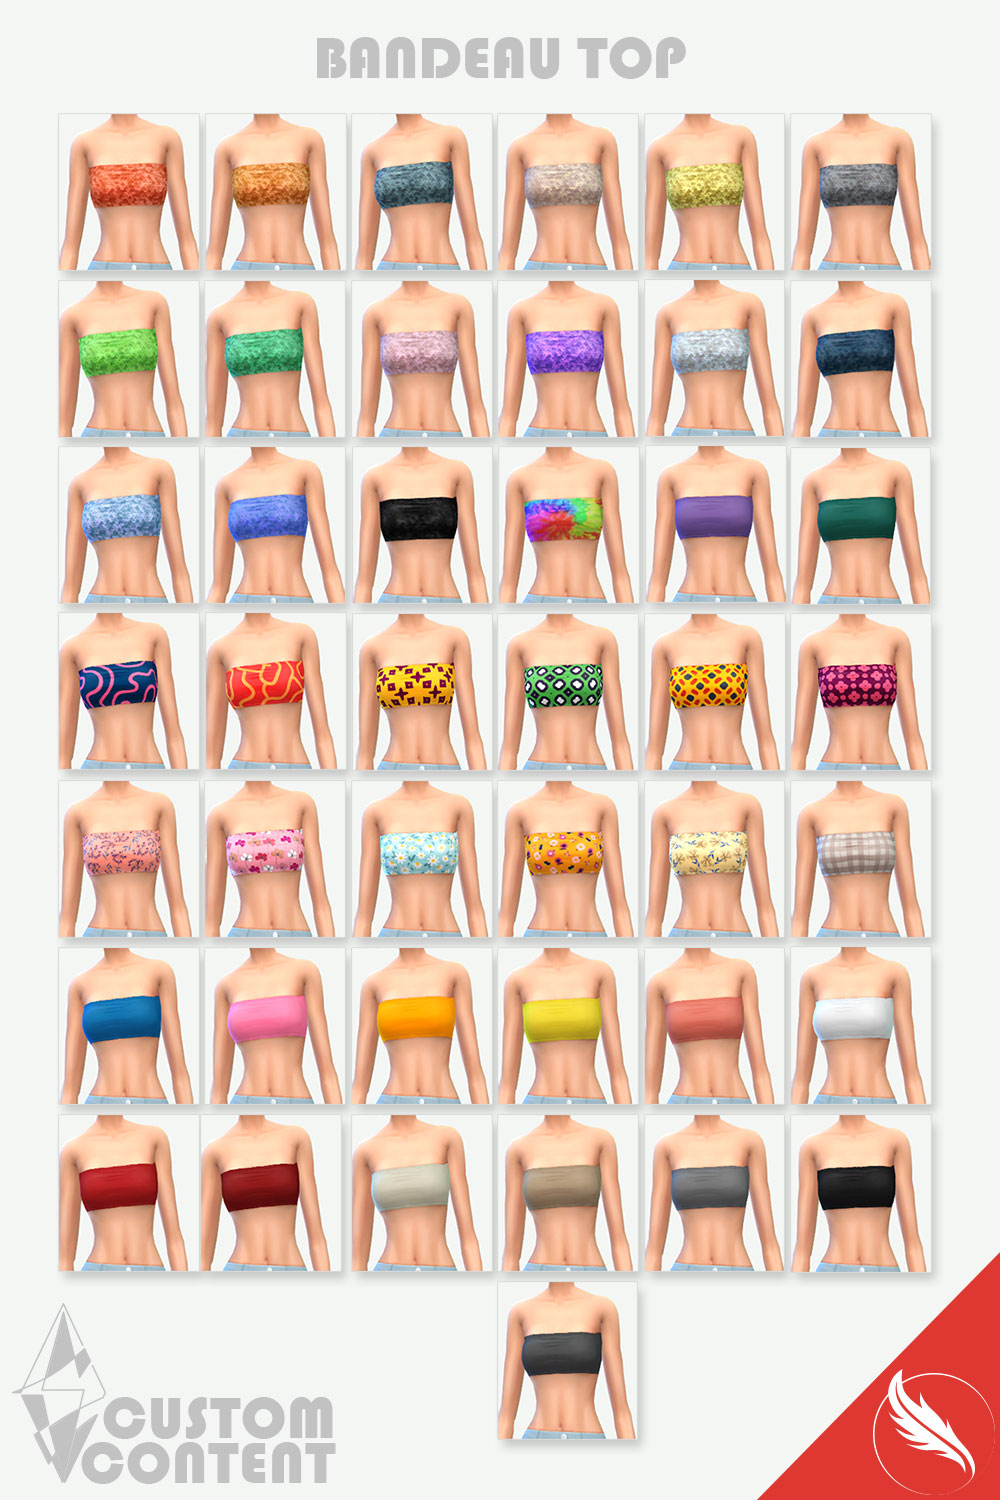 The Sims 4 Bandeau Top Swatches